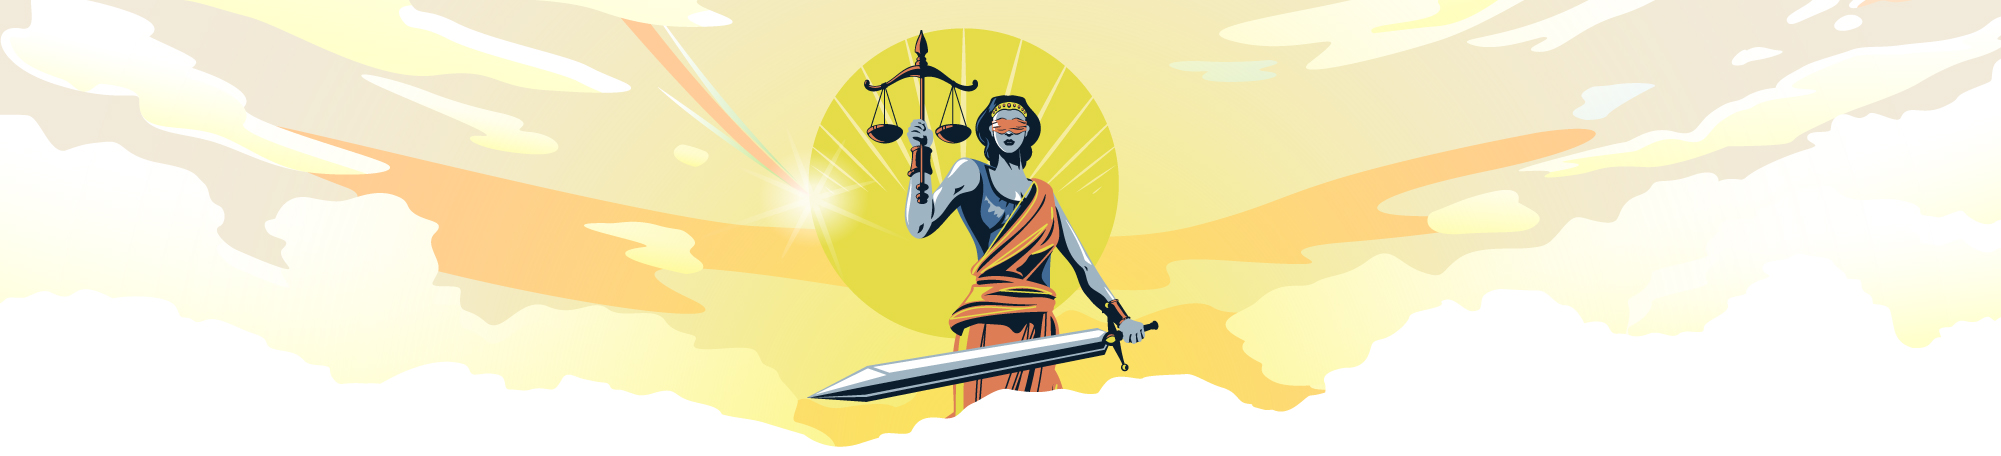 A glowing illustration of lady justice shining in the clouds filled with sunlight.